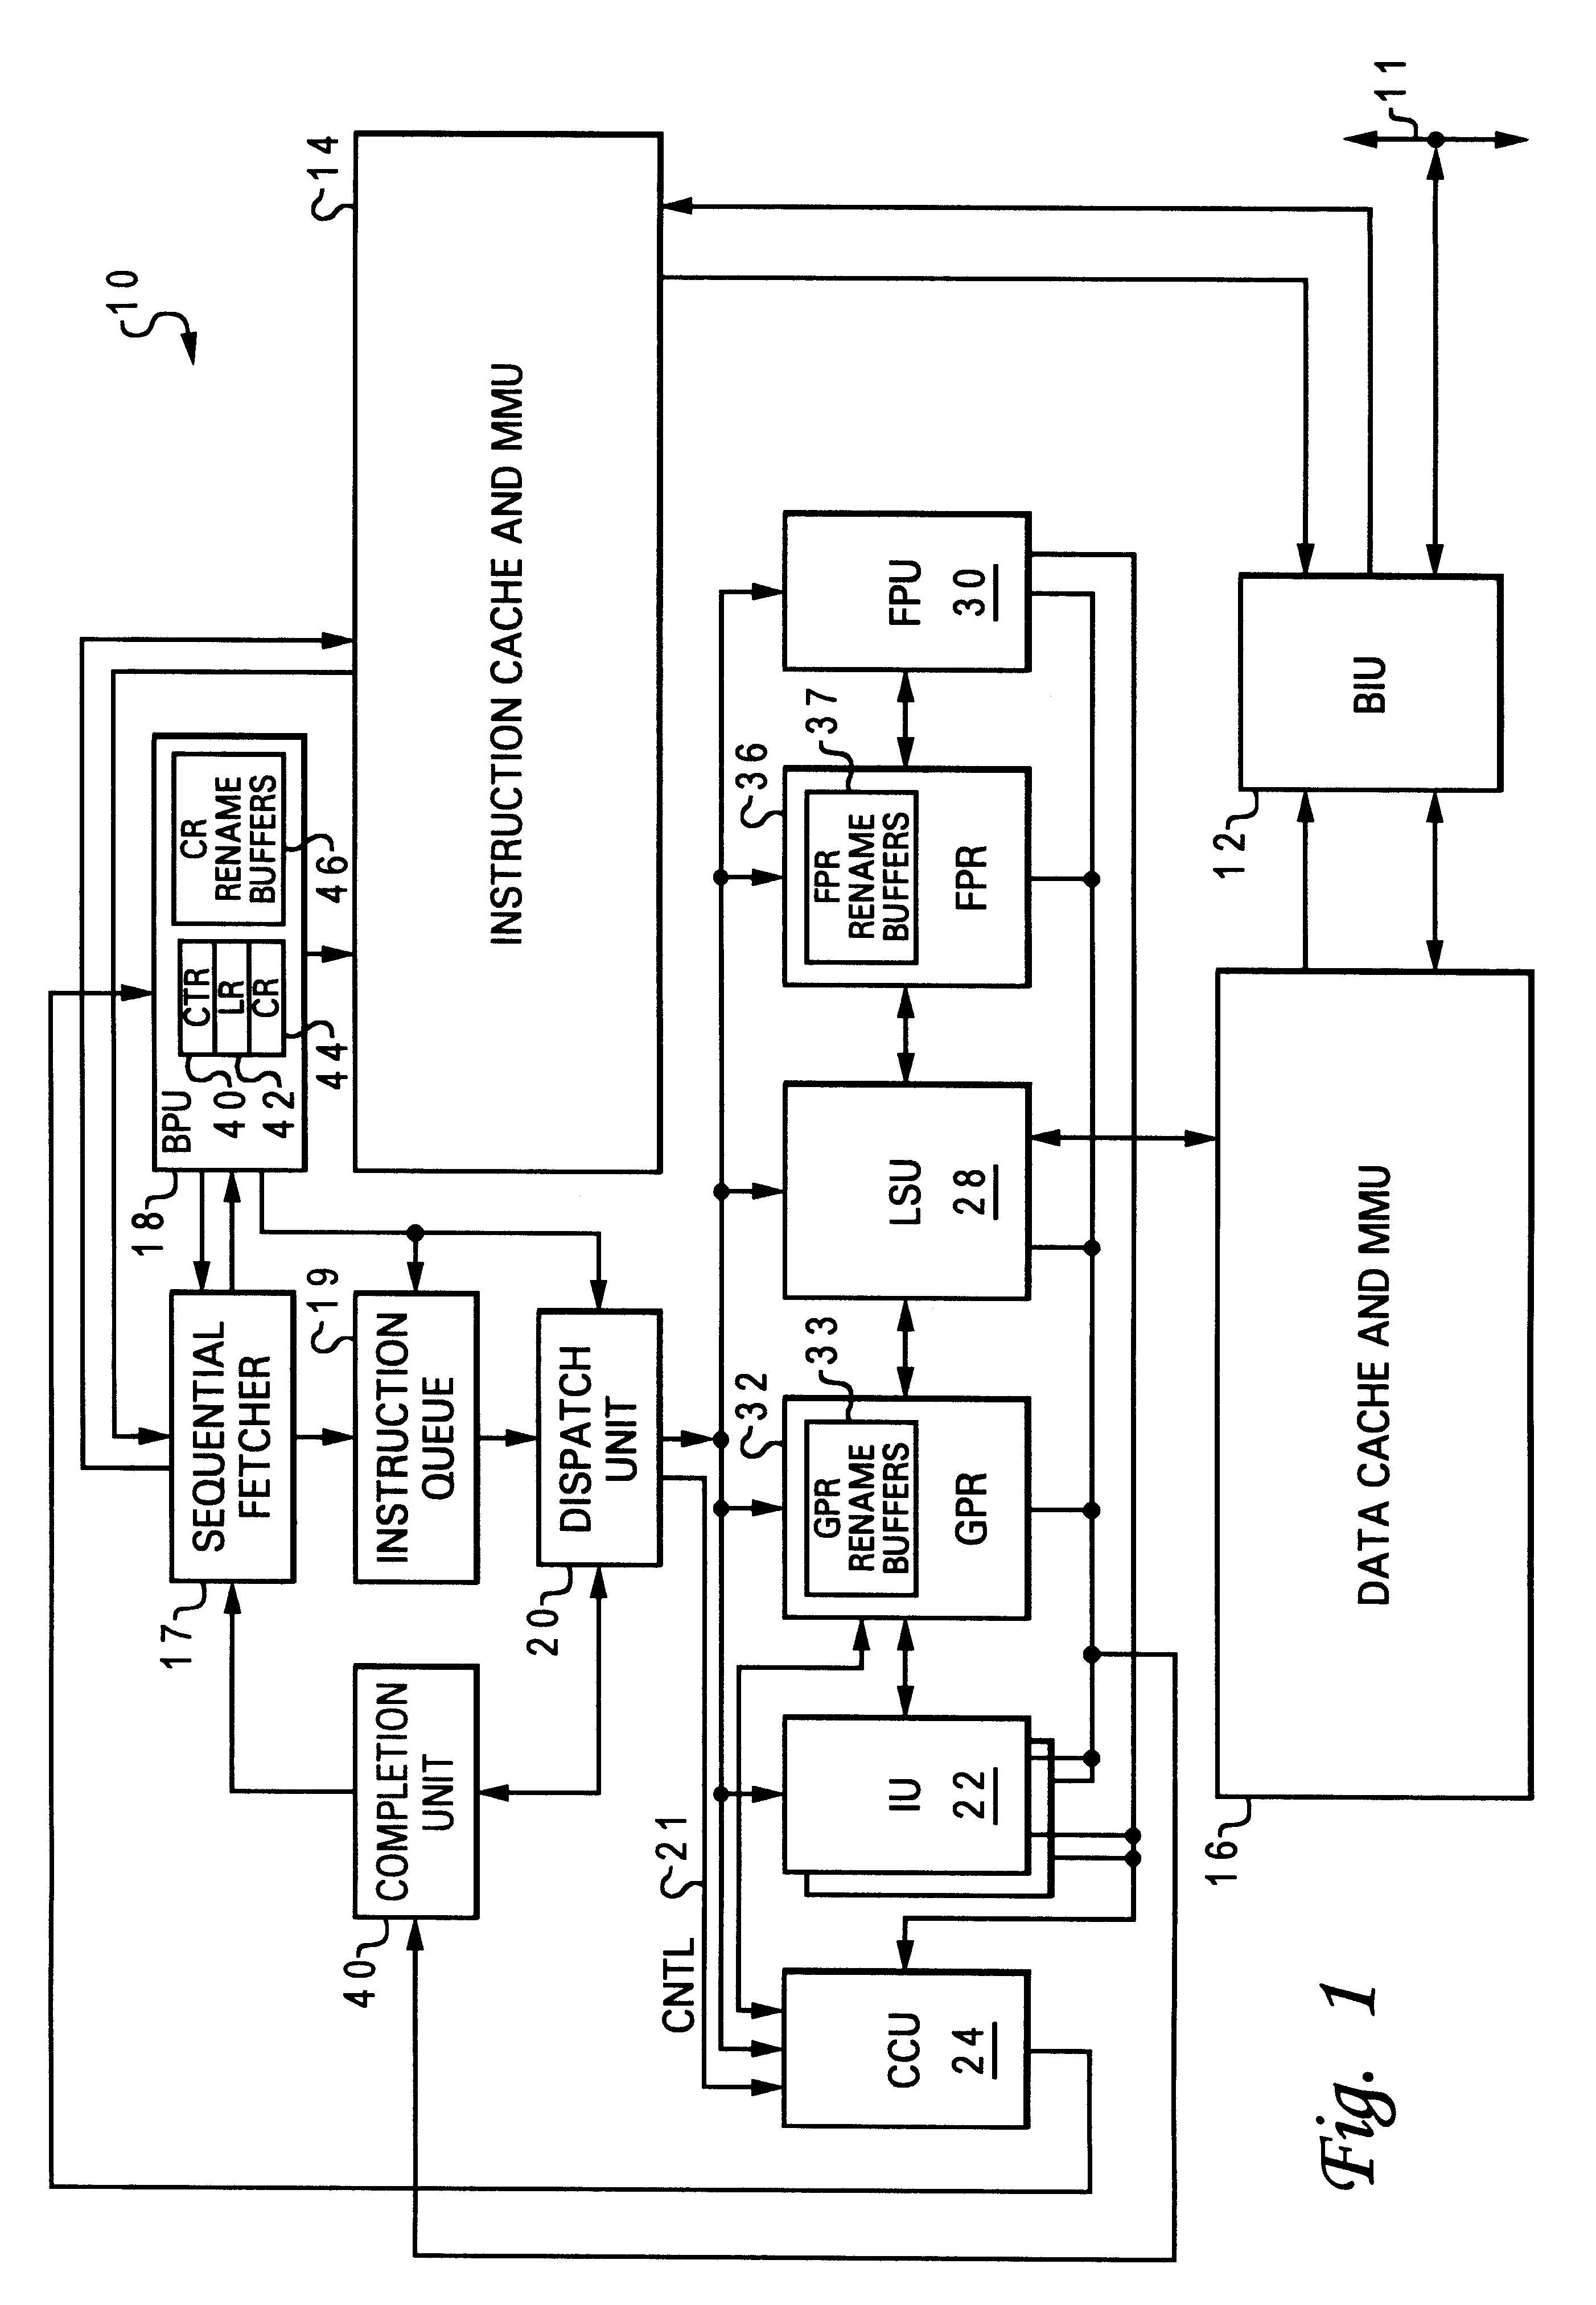 Processor and method for generating less than (LT), Greater than (GT), and equal to (EQ) condition code bits concurrent with a logical or complex operation